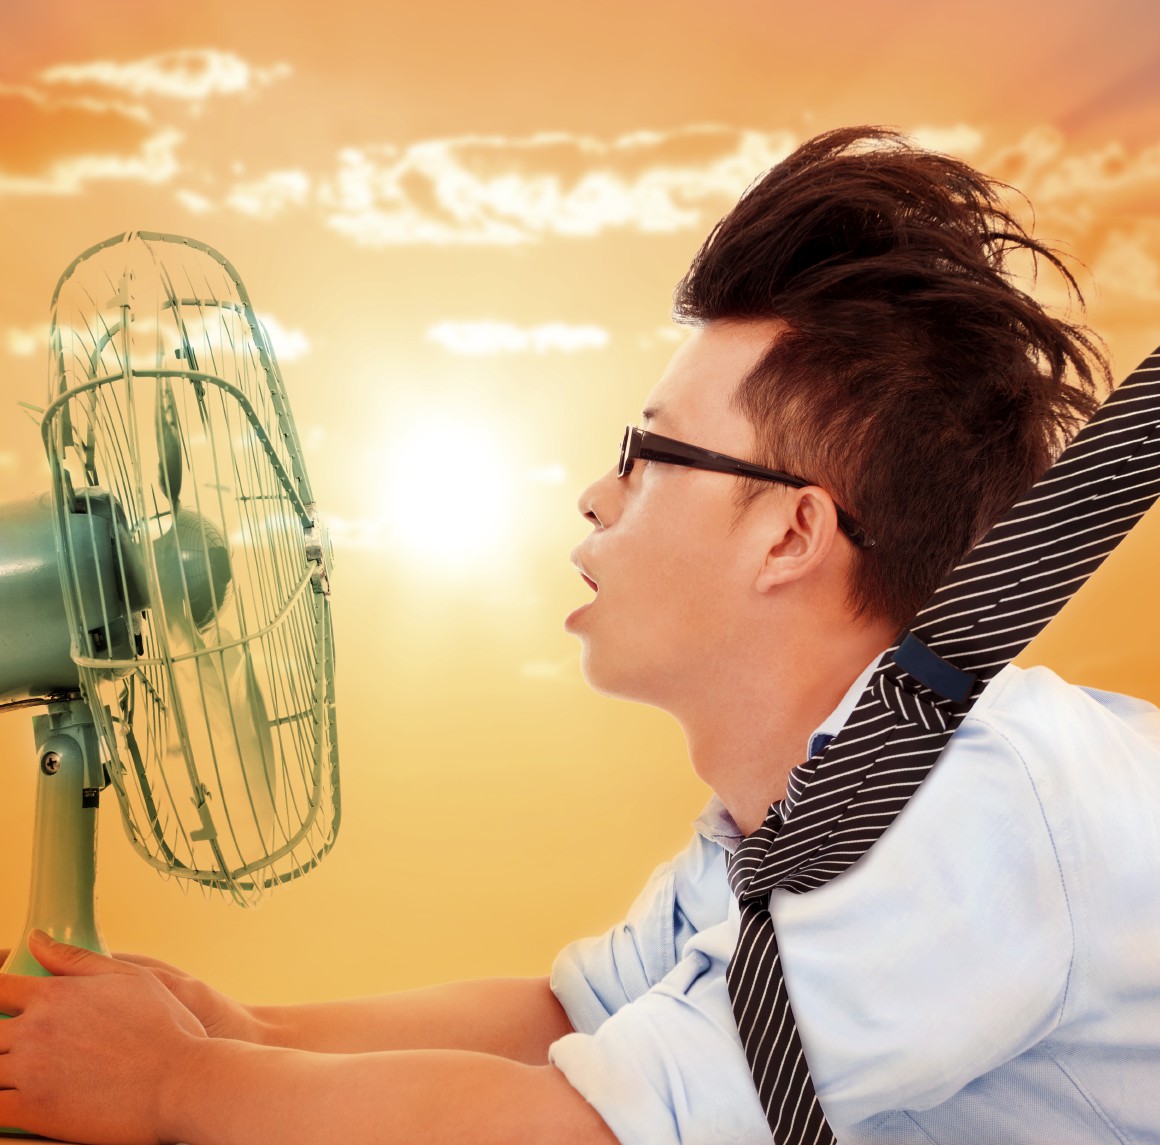 Easy Ways To Keep Cool And Save Money